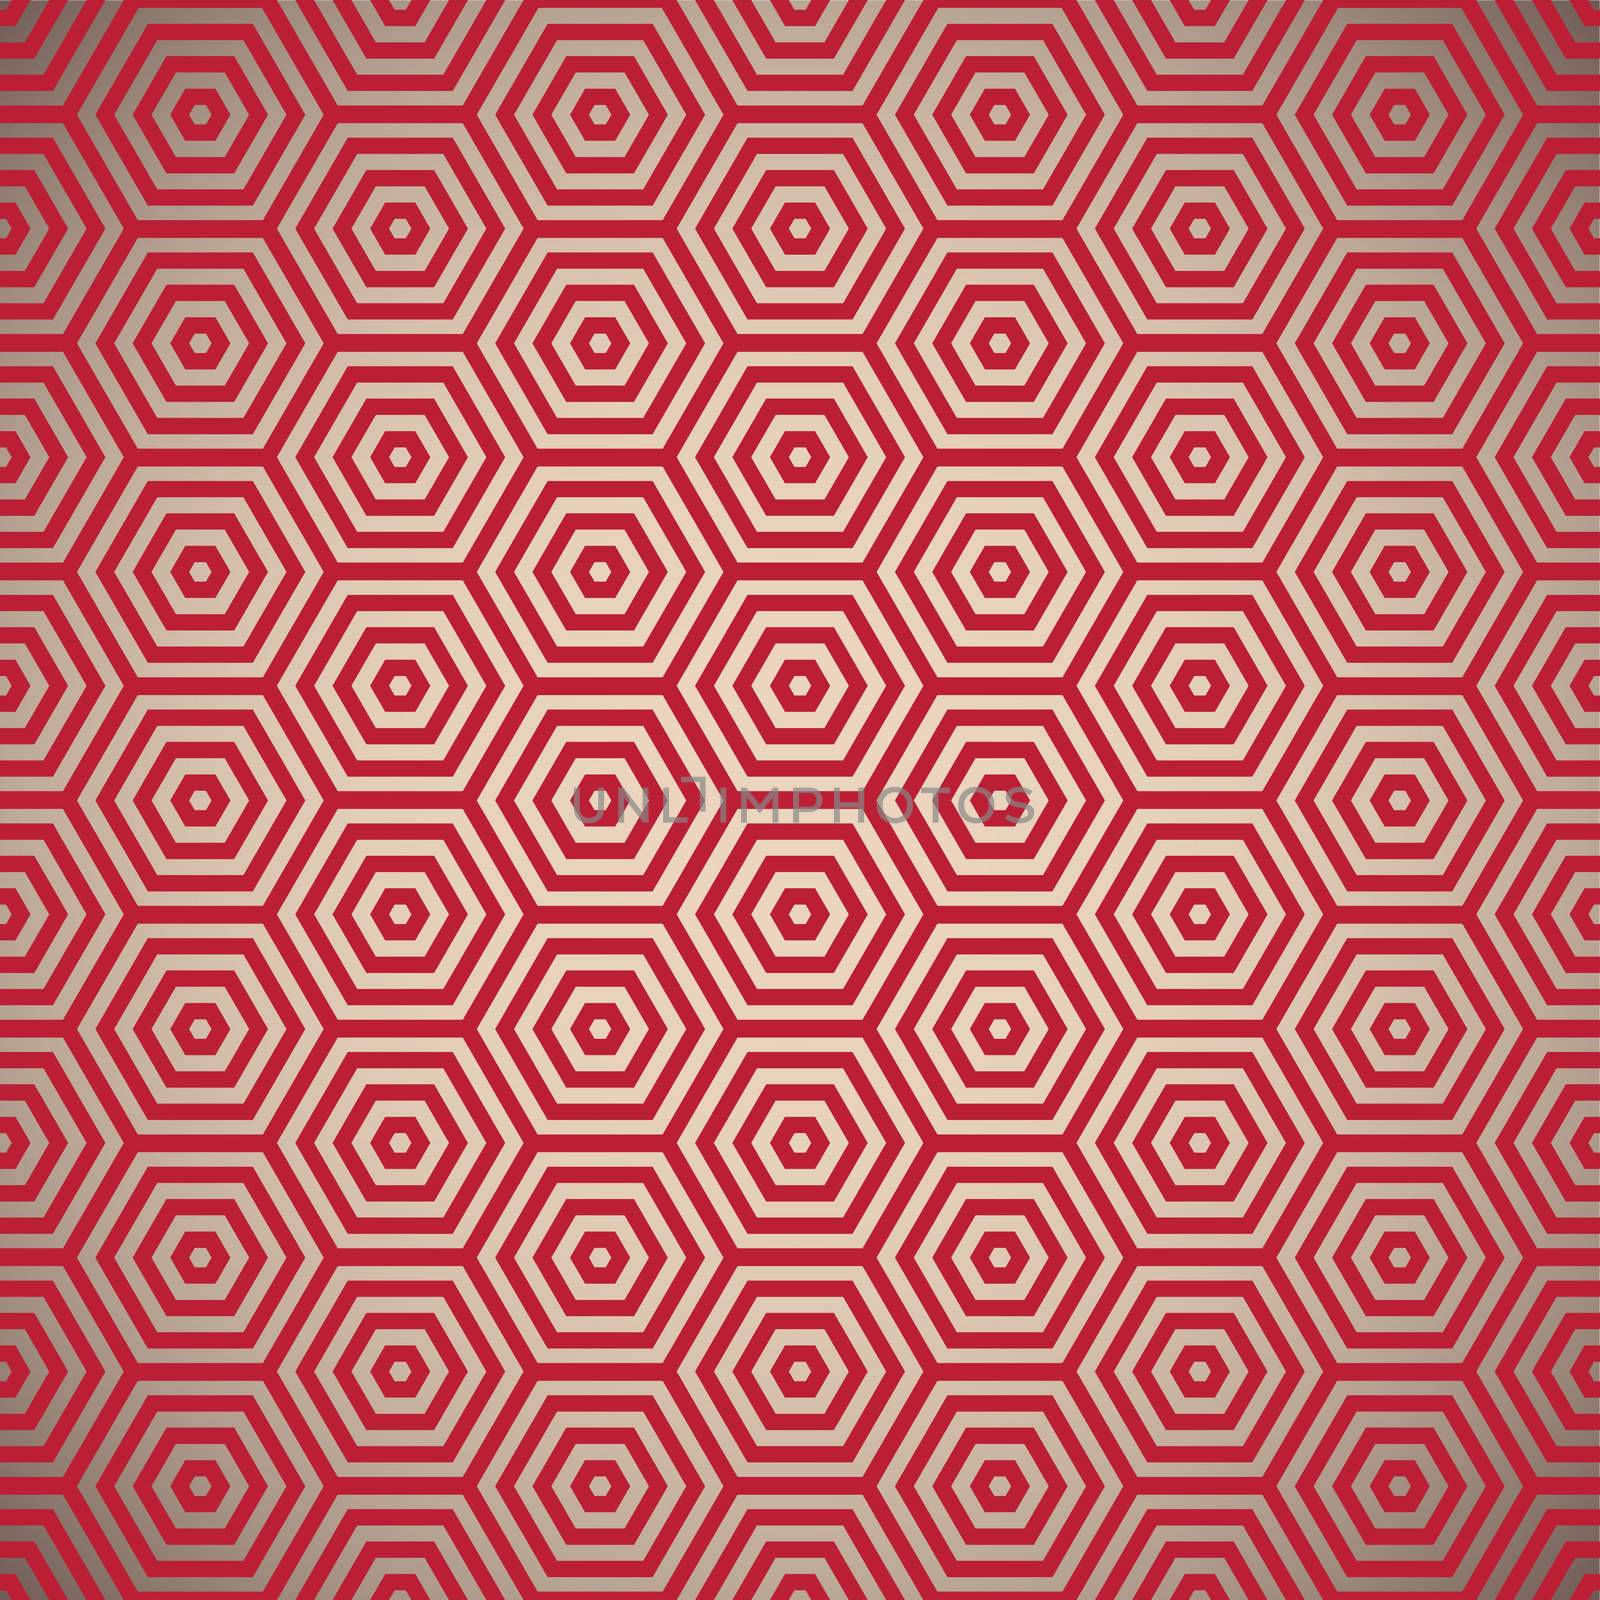 Retro inspired red seamless background pattern design